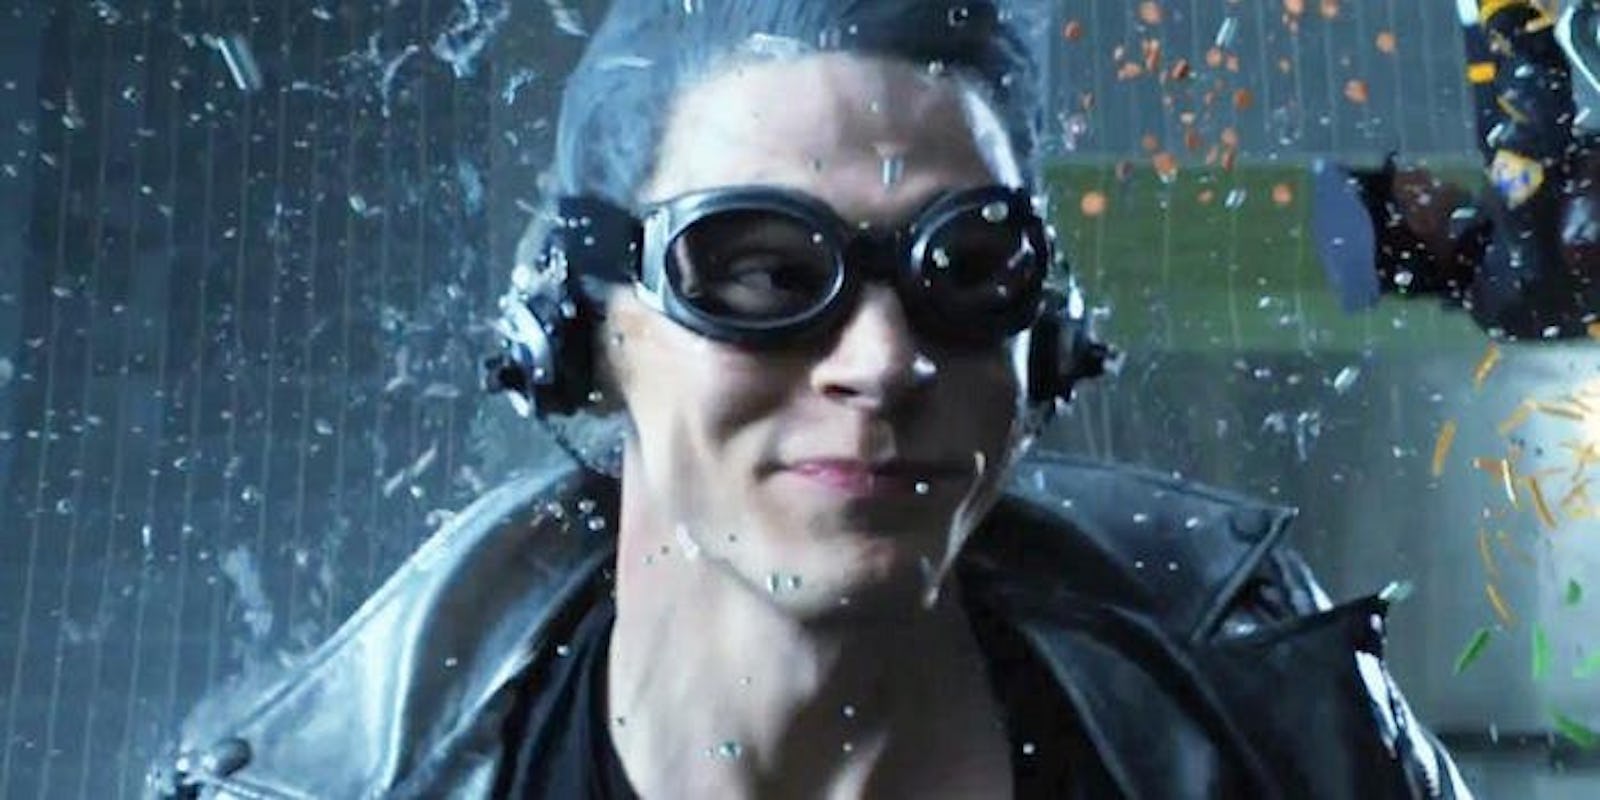 A Quicksilver Movie Could Happen, But Not Without Some Complications